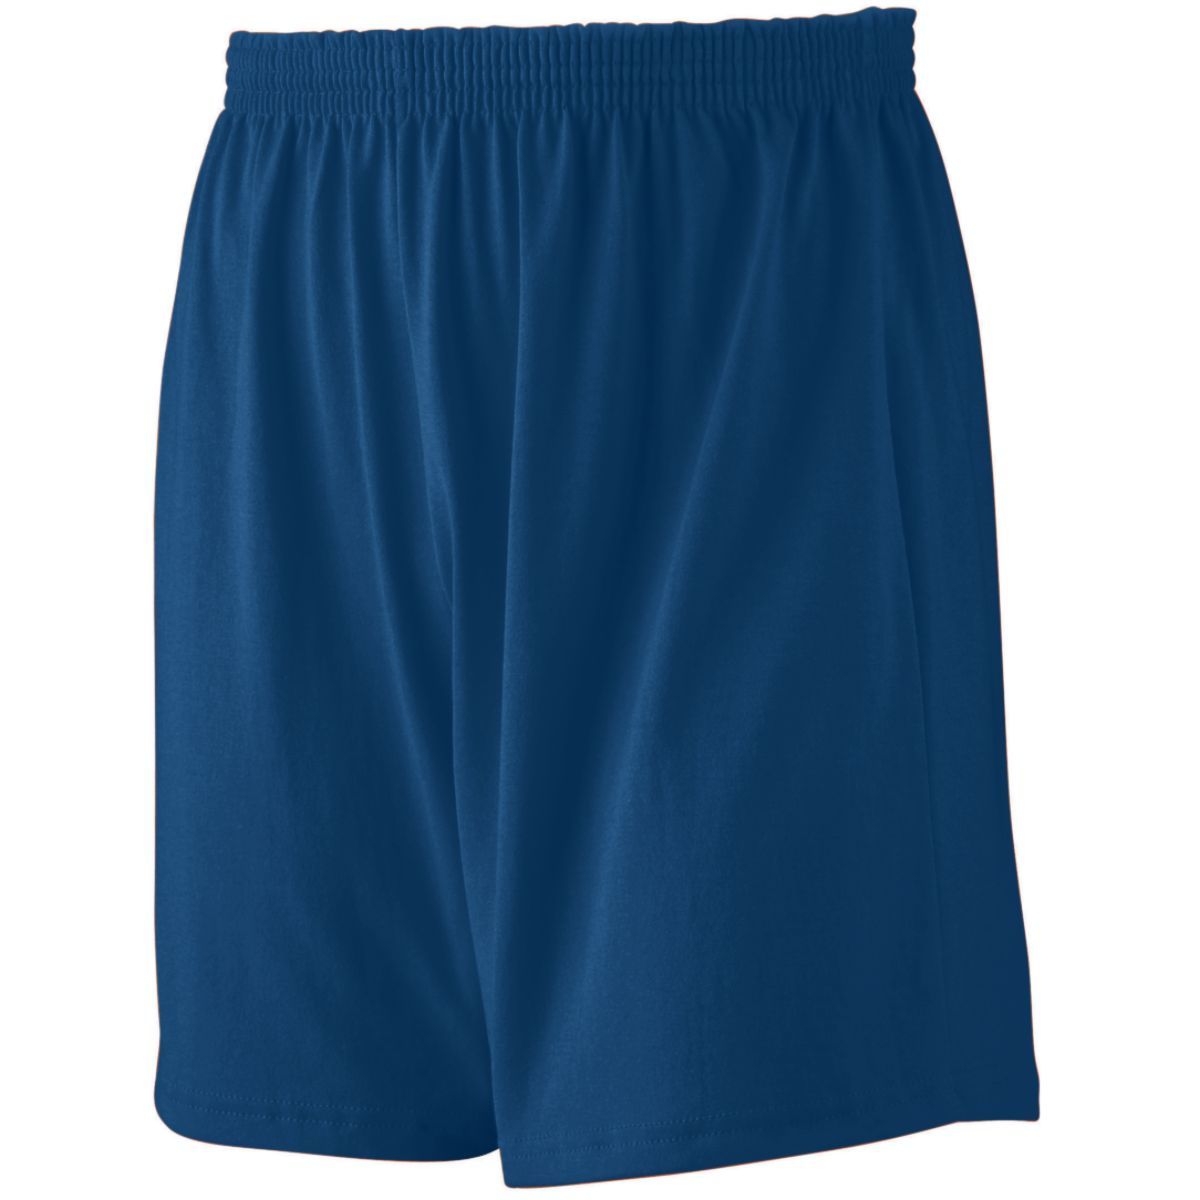 Augusta Sportswear Jersey Knit Shorts in Navy  -Part of the Adult, Adult-Shorts, Augusta-Products product lines at KanaleyCreations.com